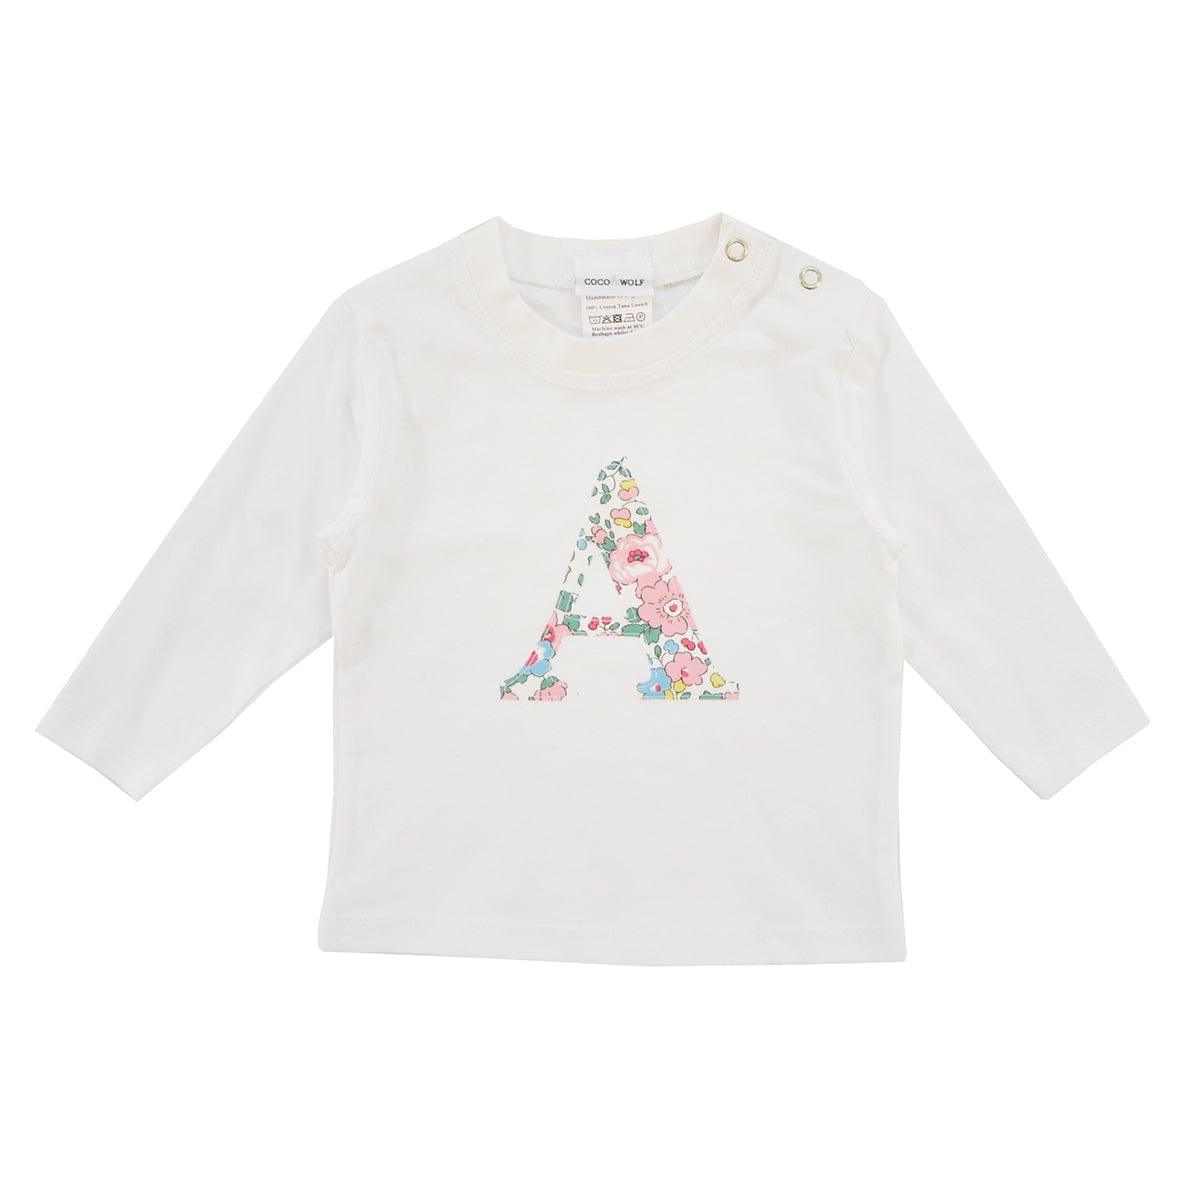 Personalised Letter T-Shirt Top made with Liberty Fabric BETSY - Coco & Wolf